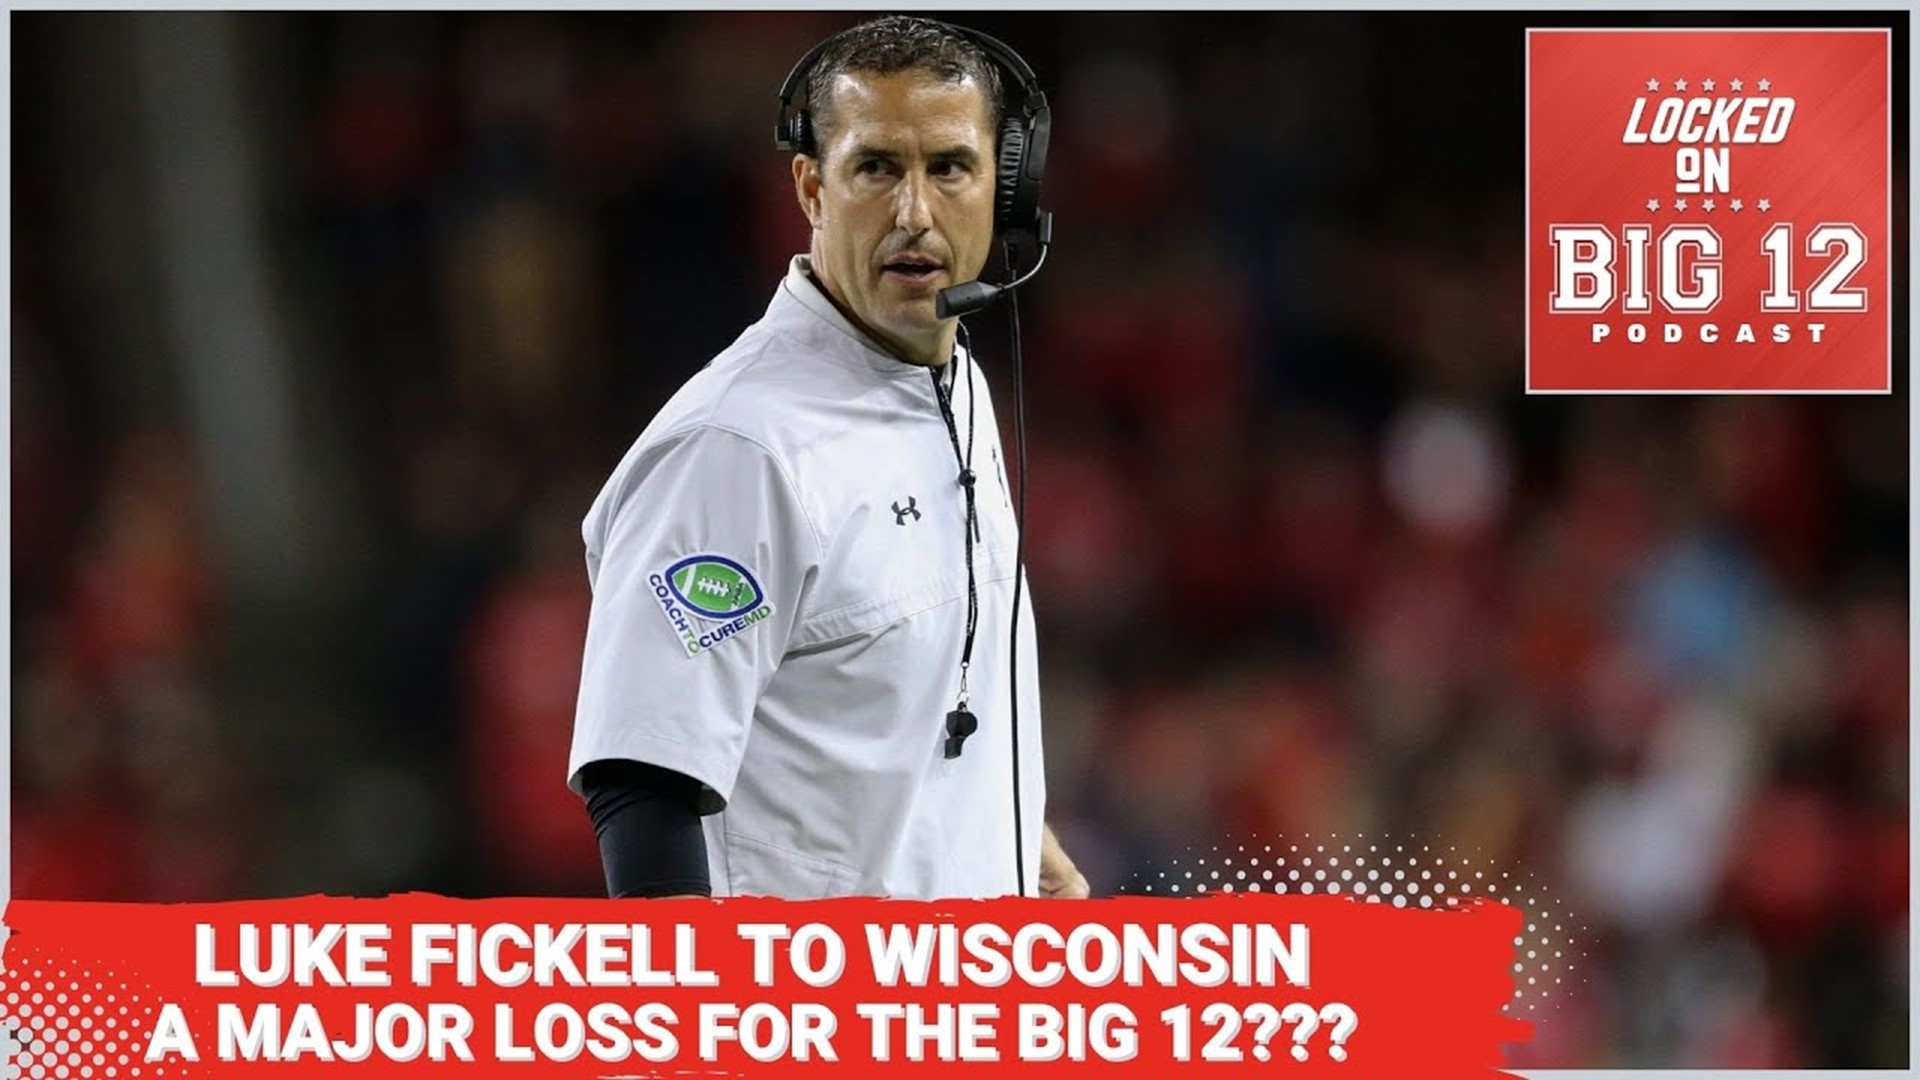 Why Luke Fickell Taking The Wisconsin Job Could Be Major Loss For The Big 12